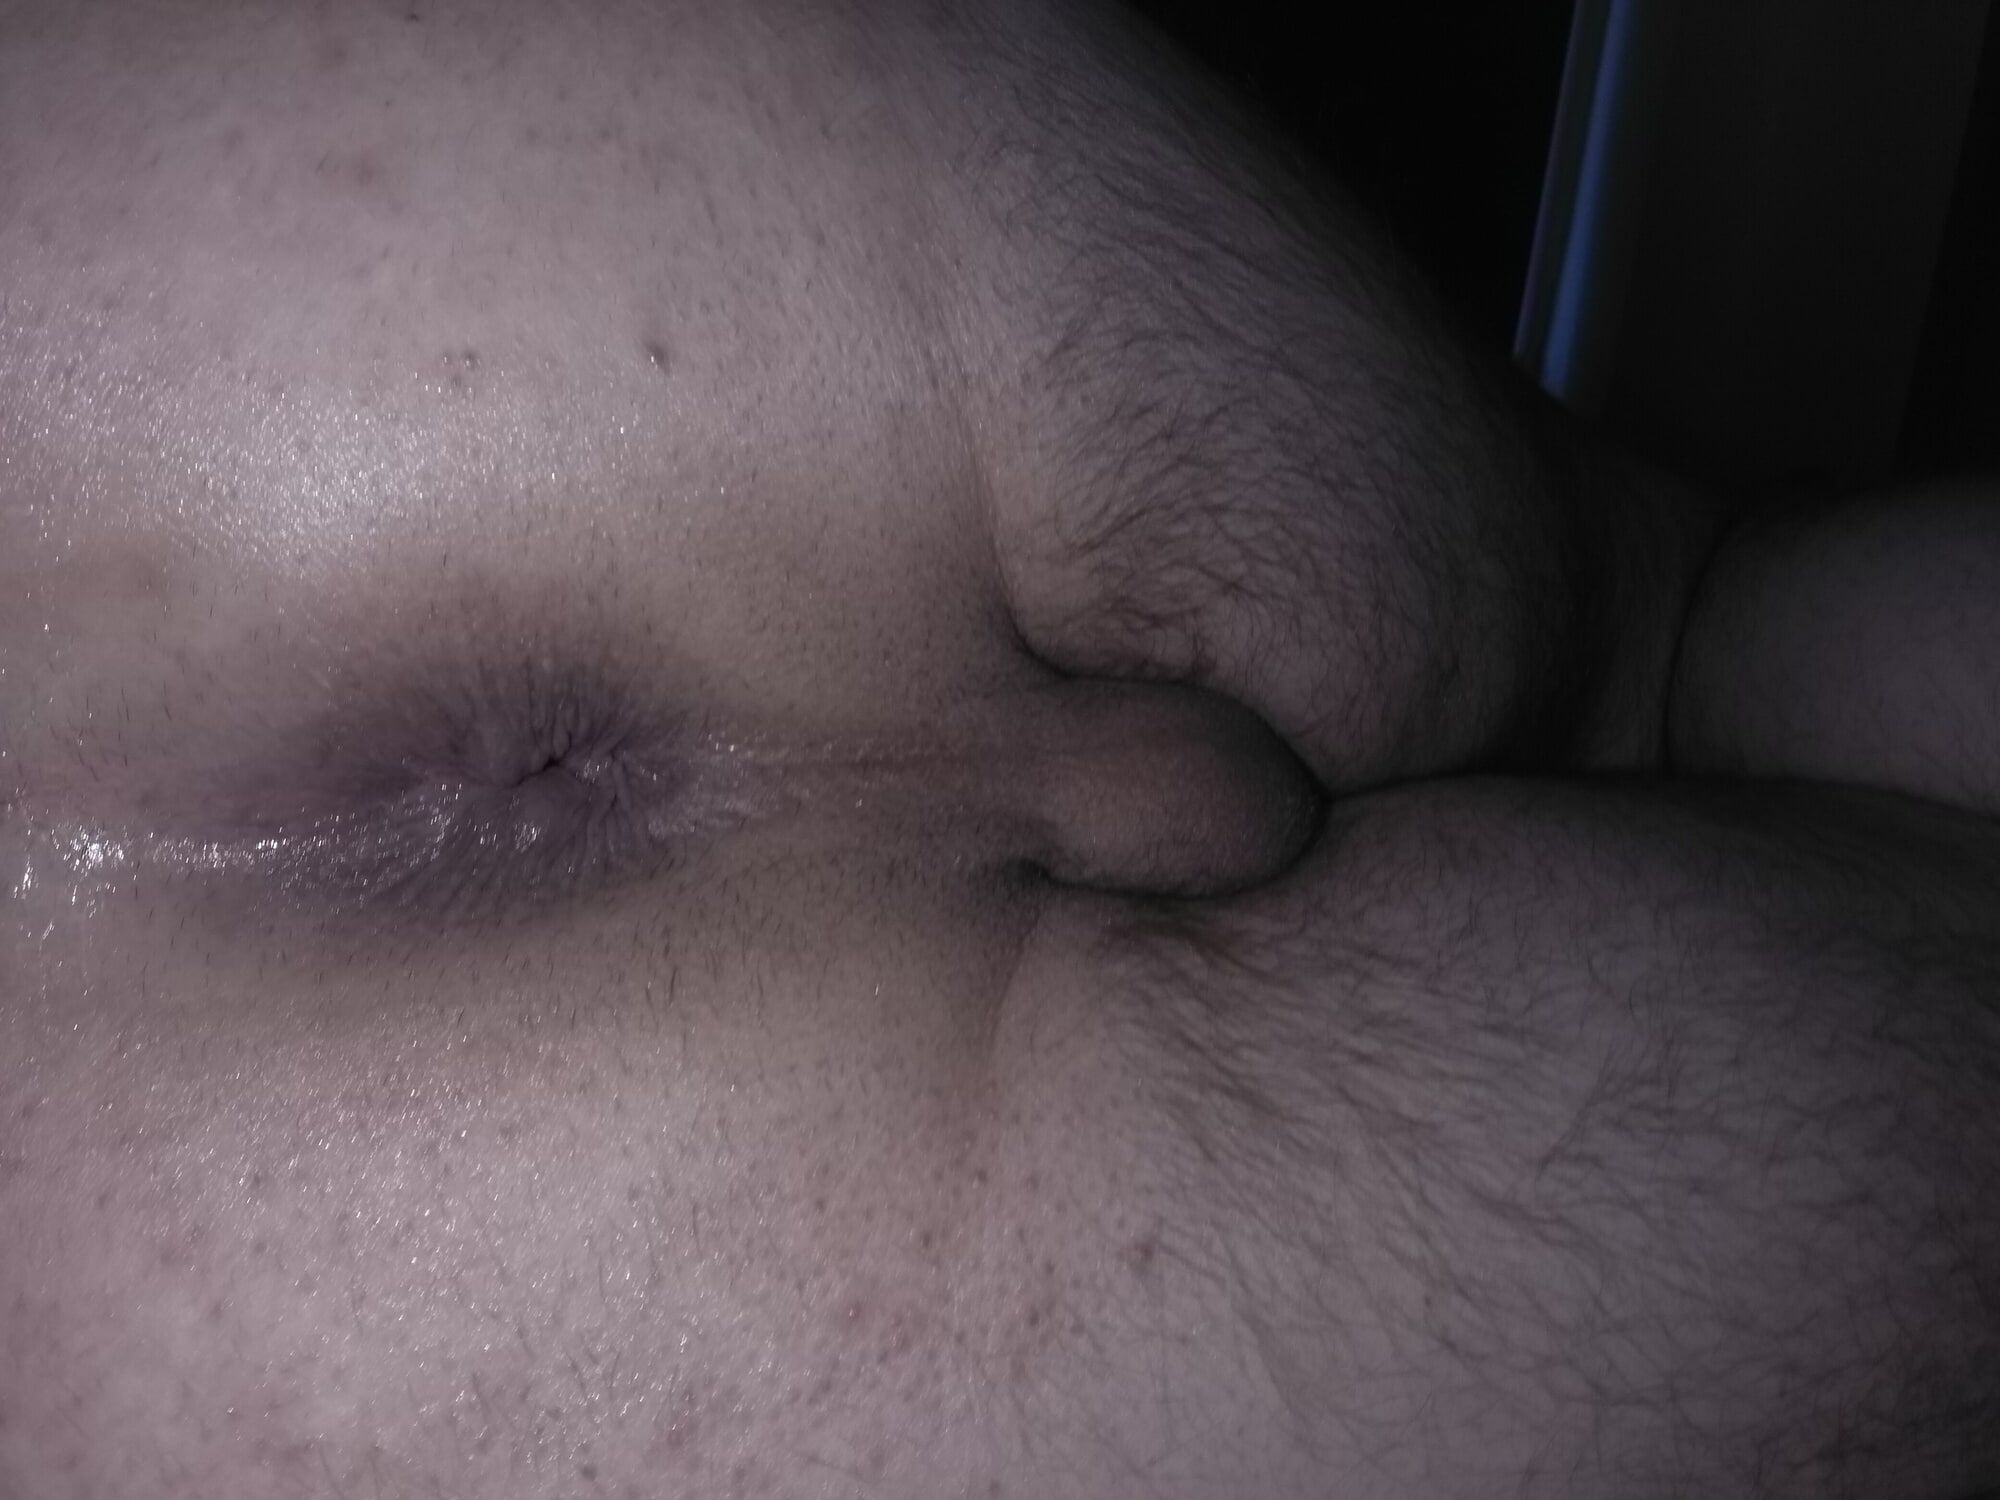 After dildo action #7